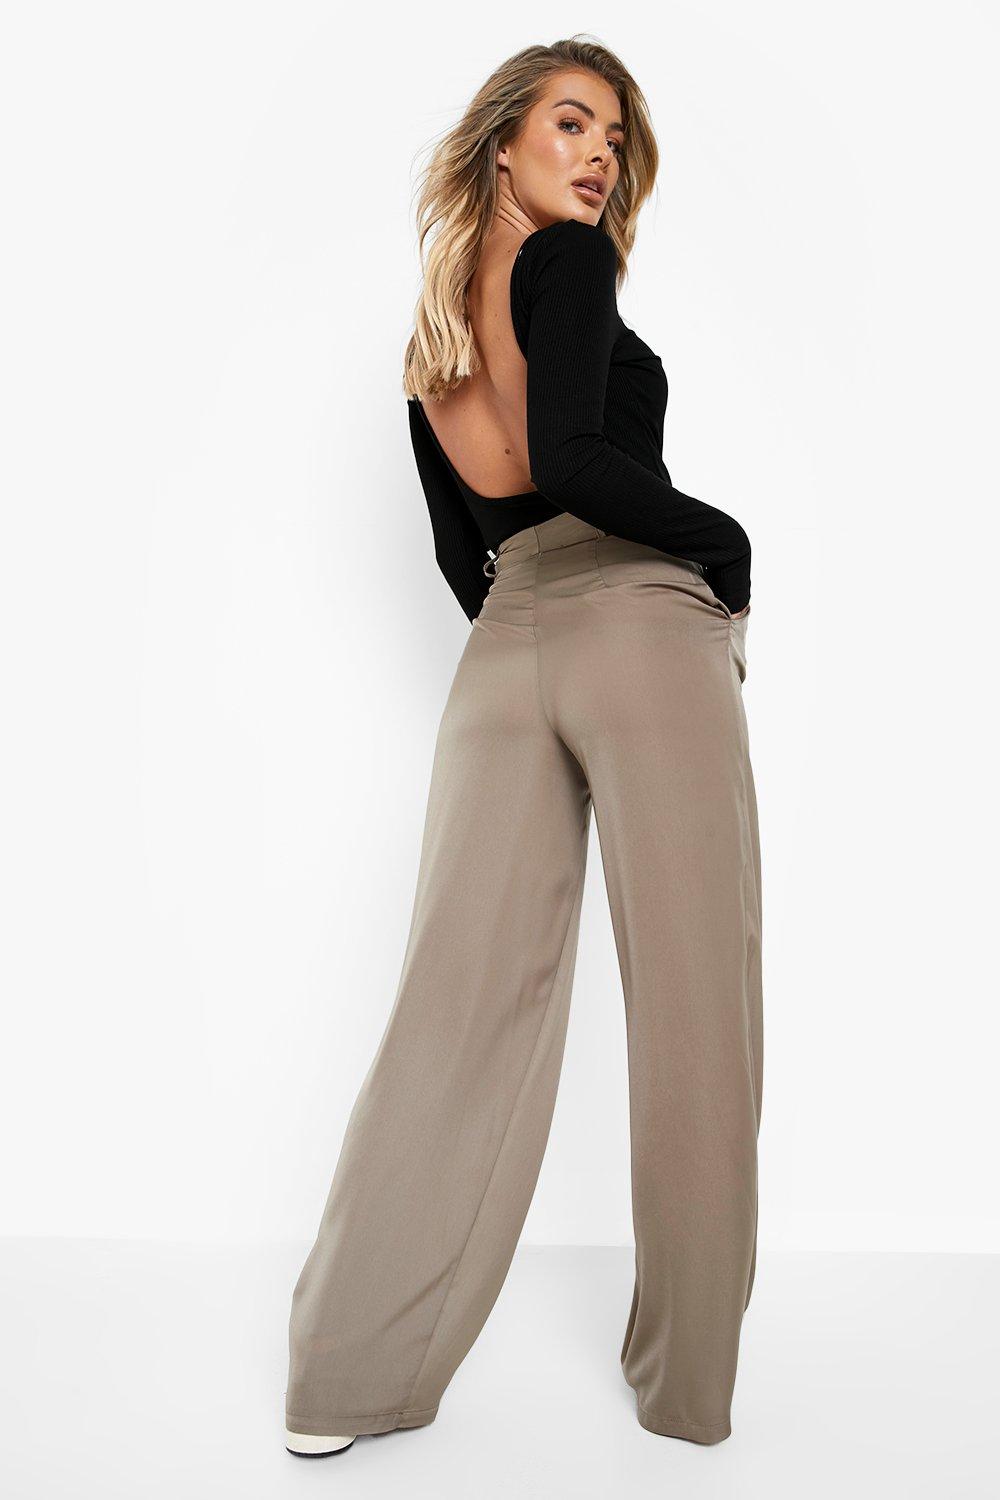 Womens Trousers Boohoo Brown Plus Recycled Satin Wide Leg Trouser Slacks and Chinos Slacks and Chinos Boohoo Trousers 